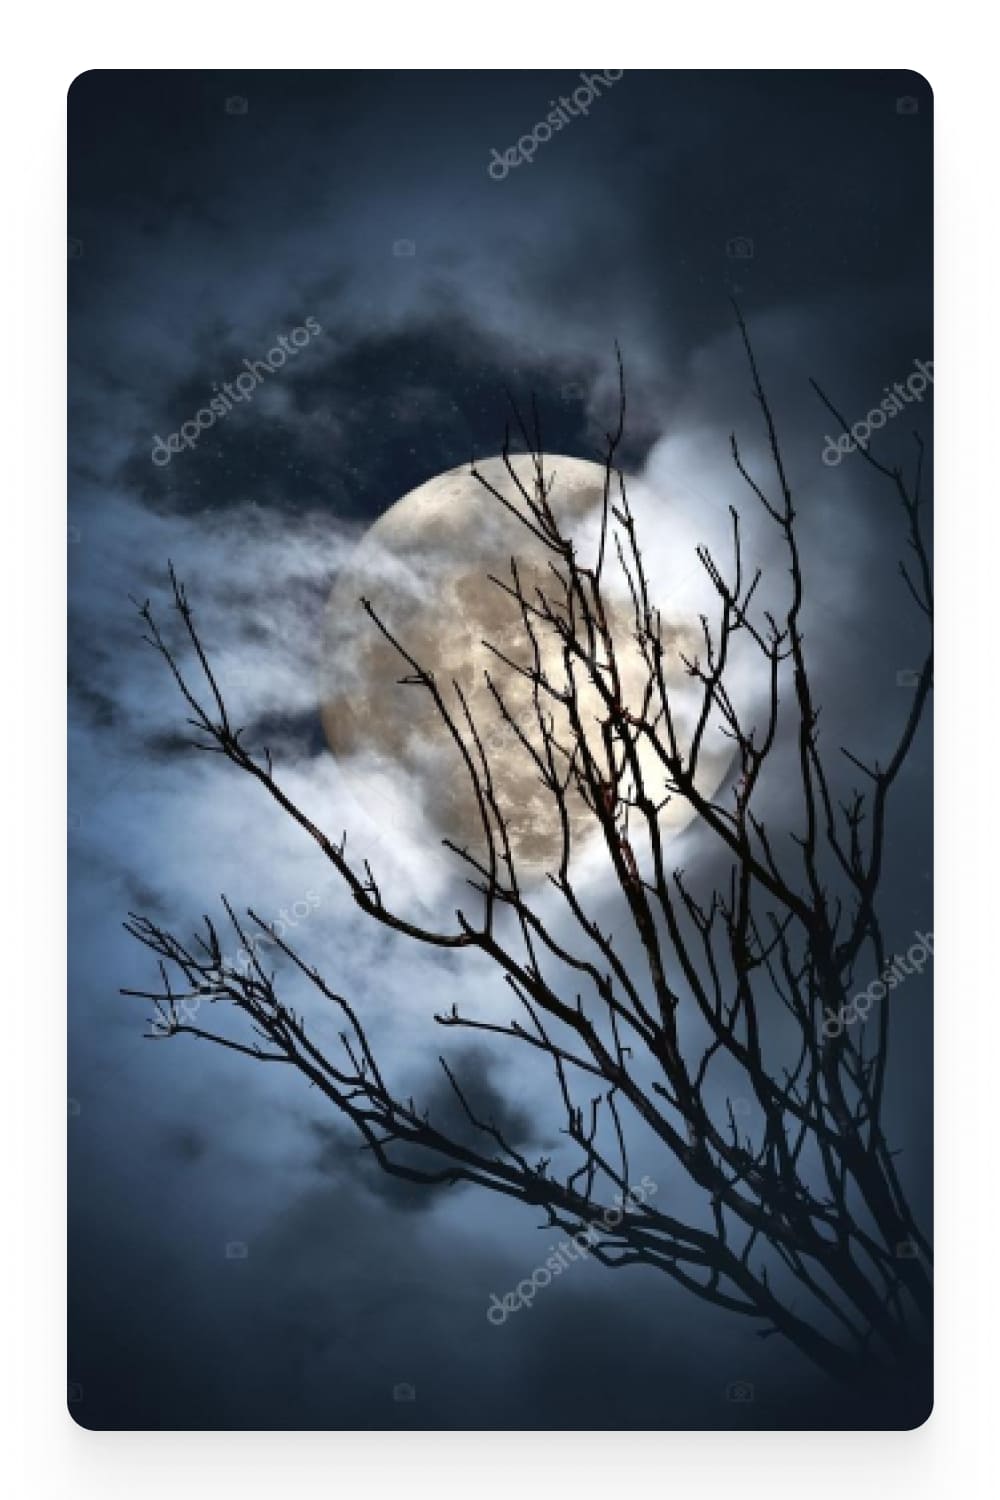 Photo of a full moon in the sky through the branches of a tree.